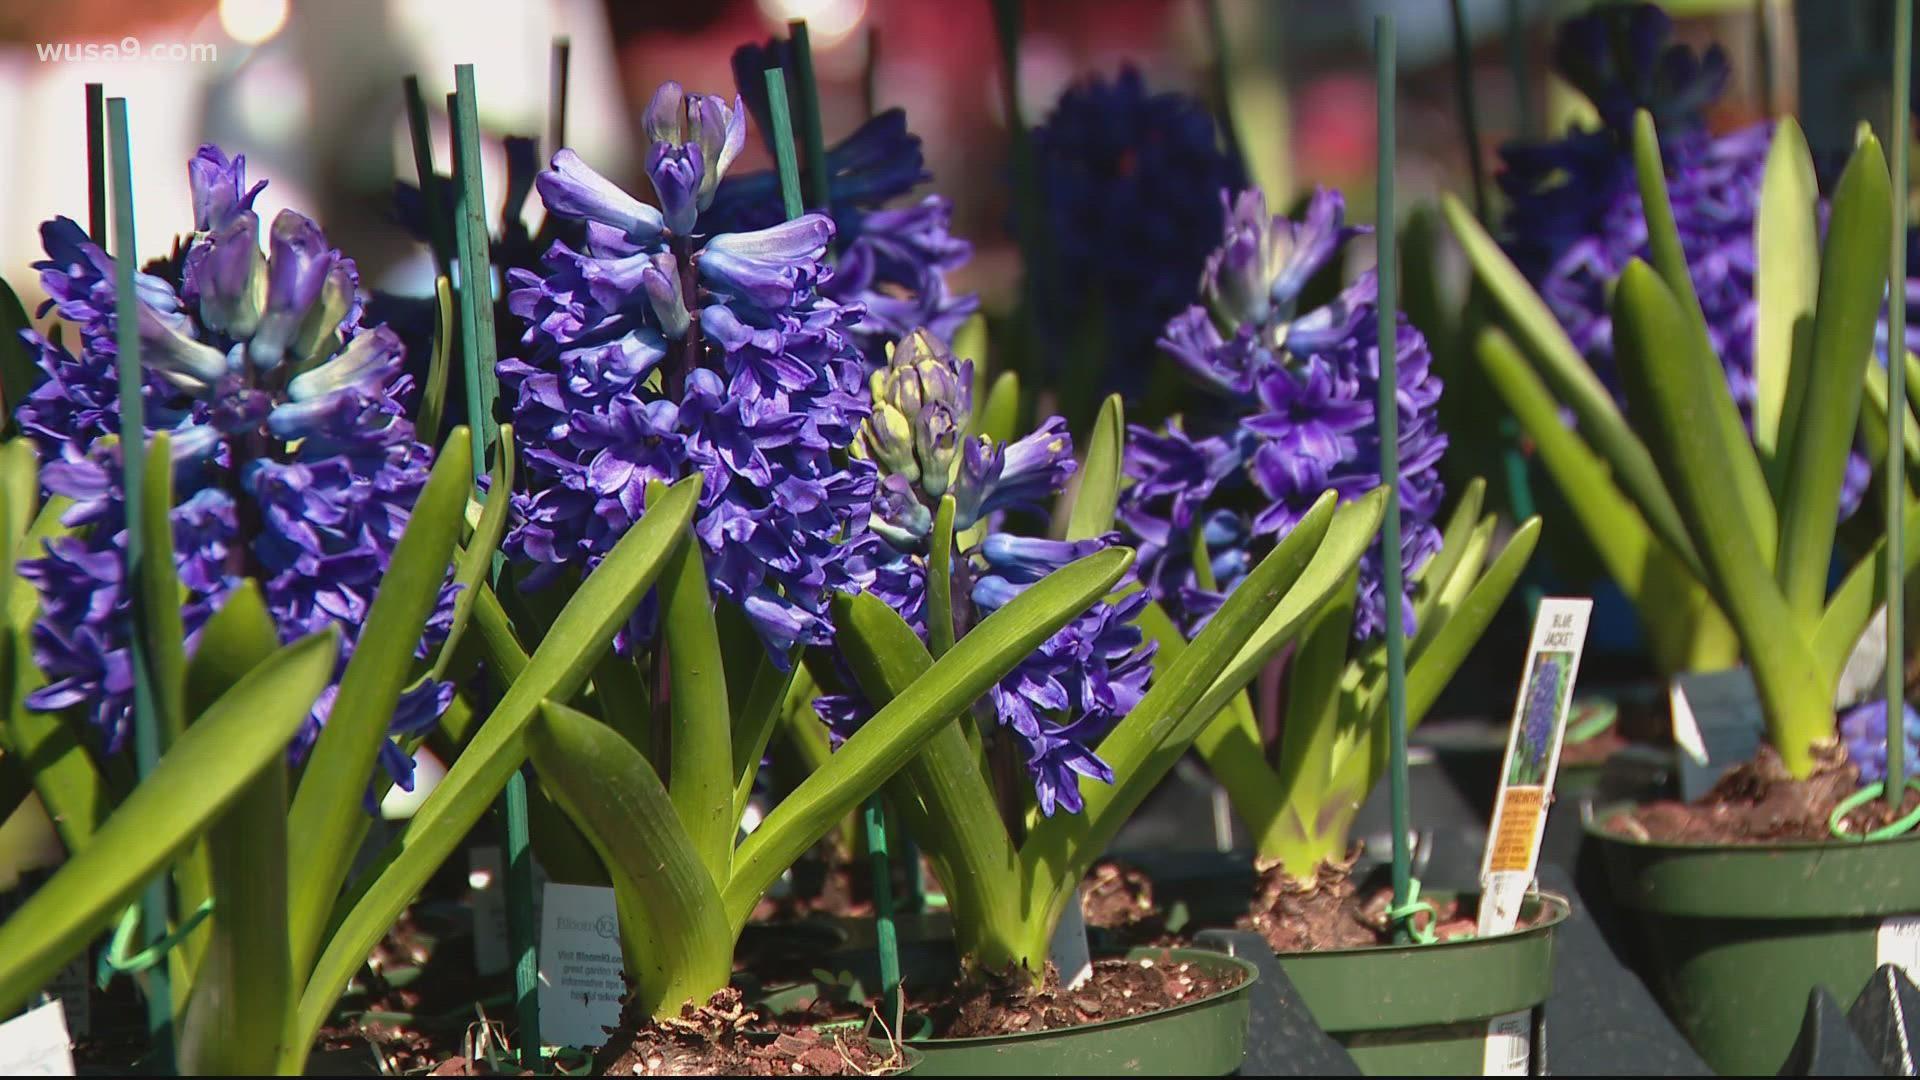 Garden experts advise bringing any already-purchased plants inside as the potential for weekend snow is high.